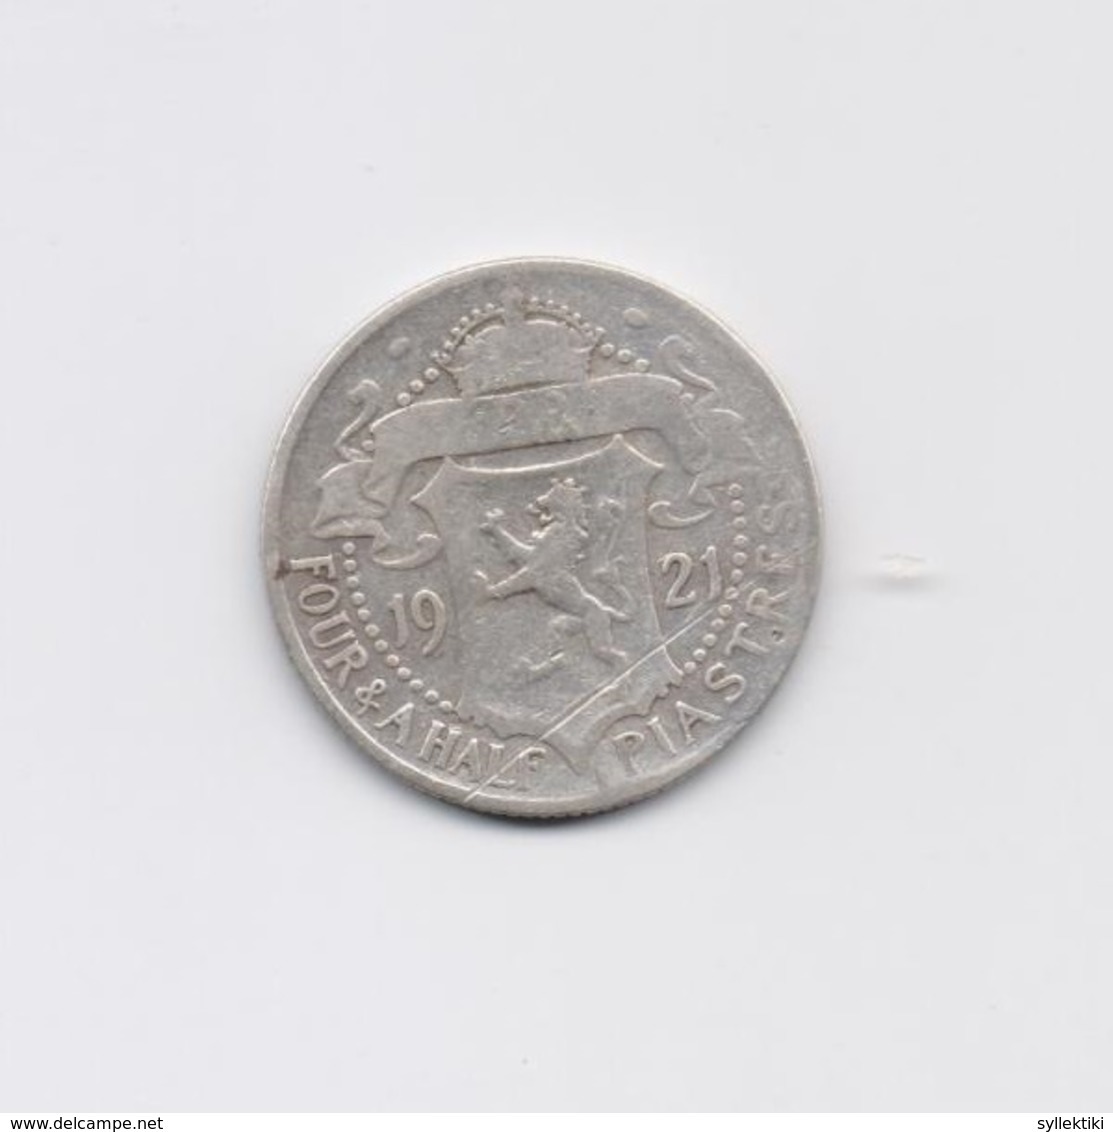 CYPRUS 1921 4 1/2 PIASTRES SILVER COIN - Cyprus